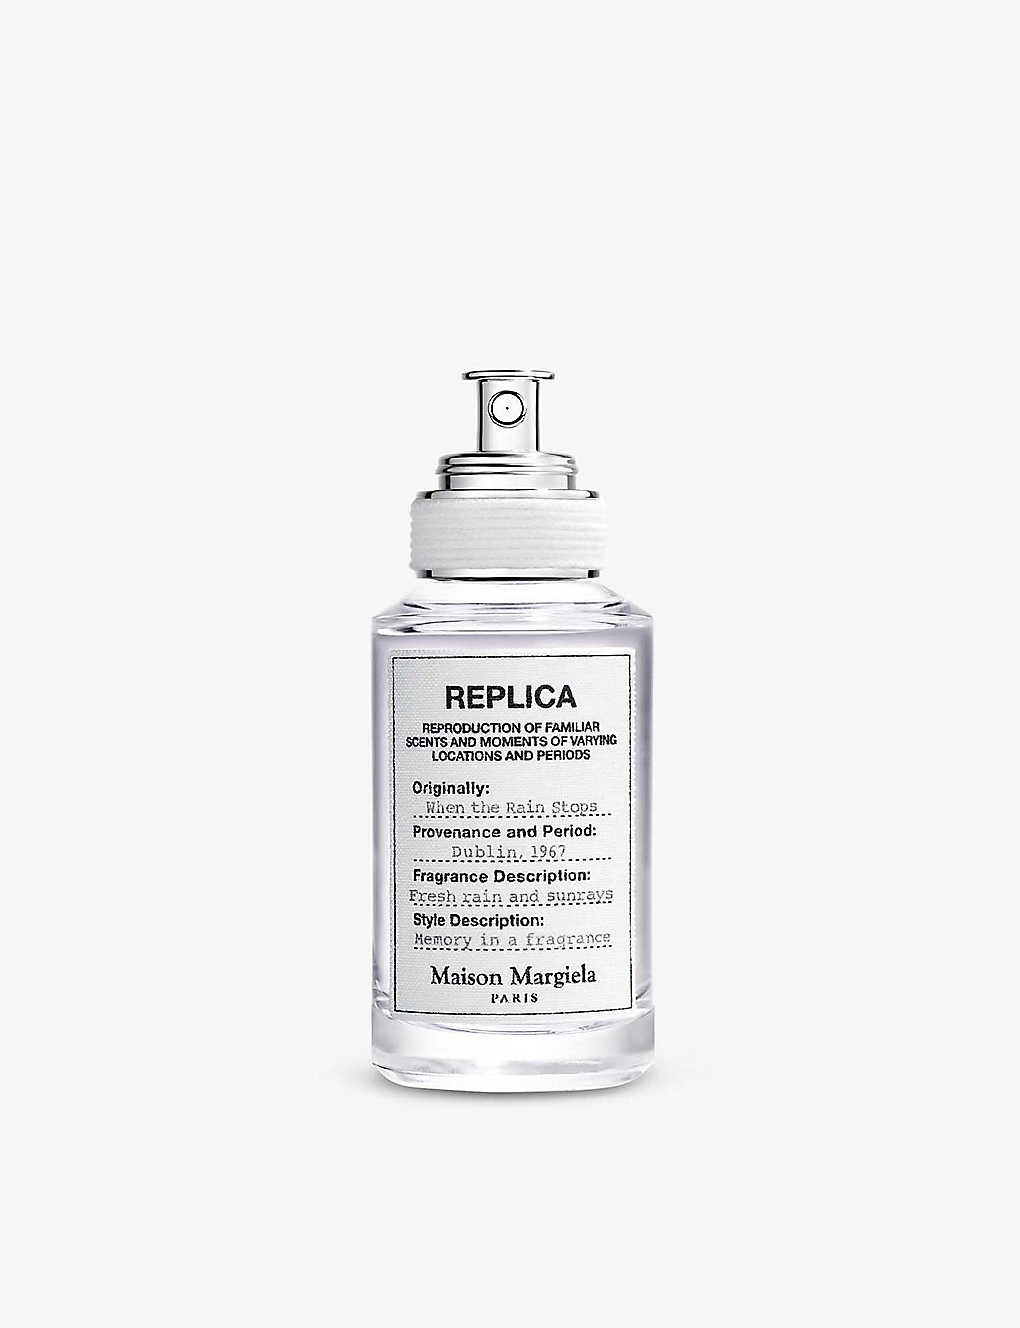 Replica When The Rain Stops: A Review ~ Fragrance Reviews